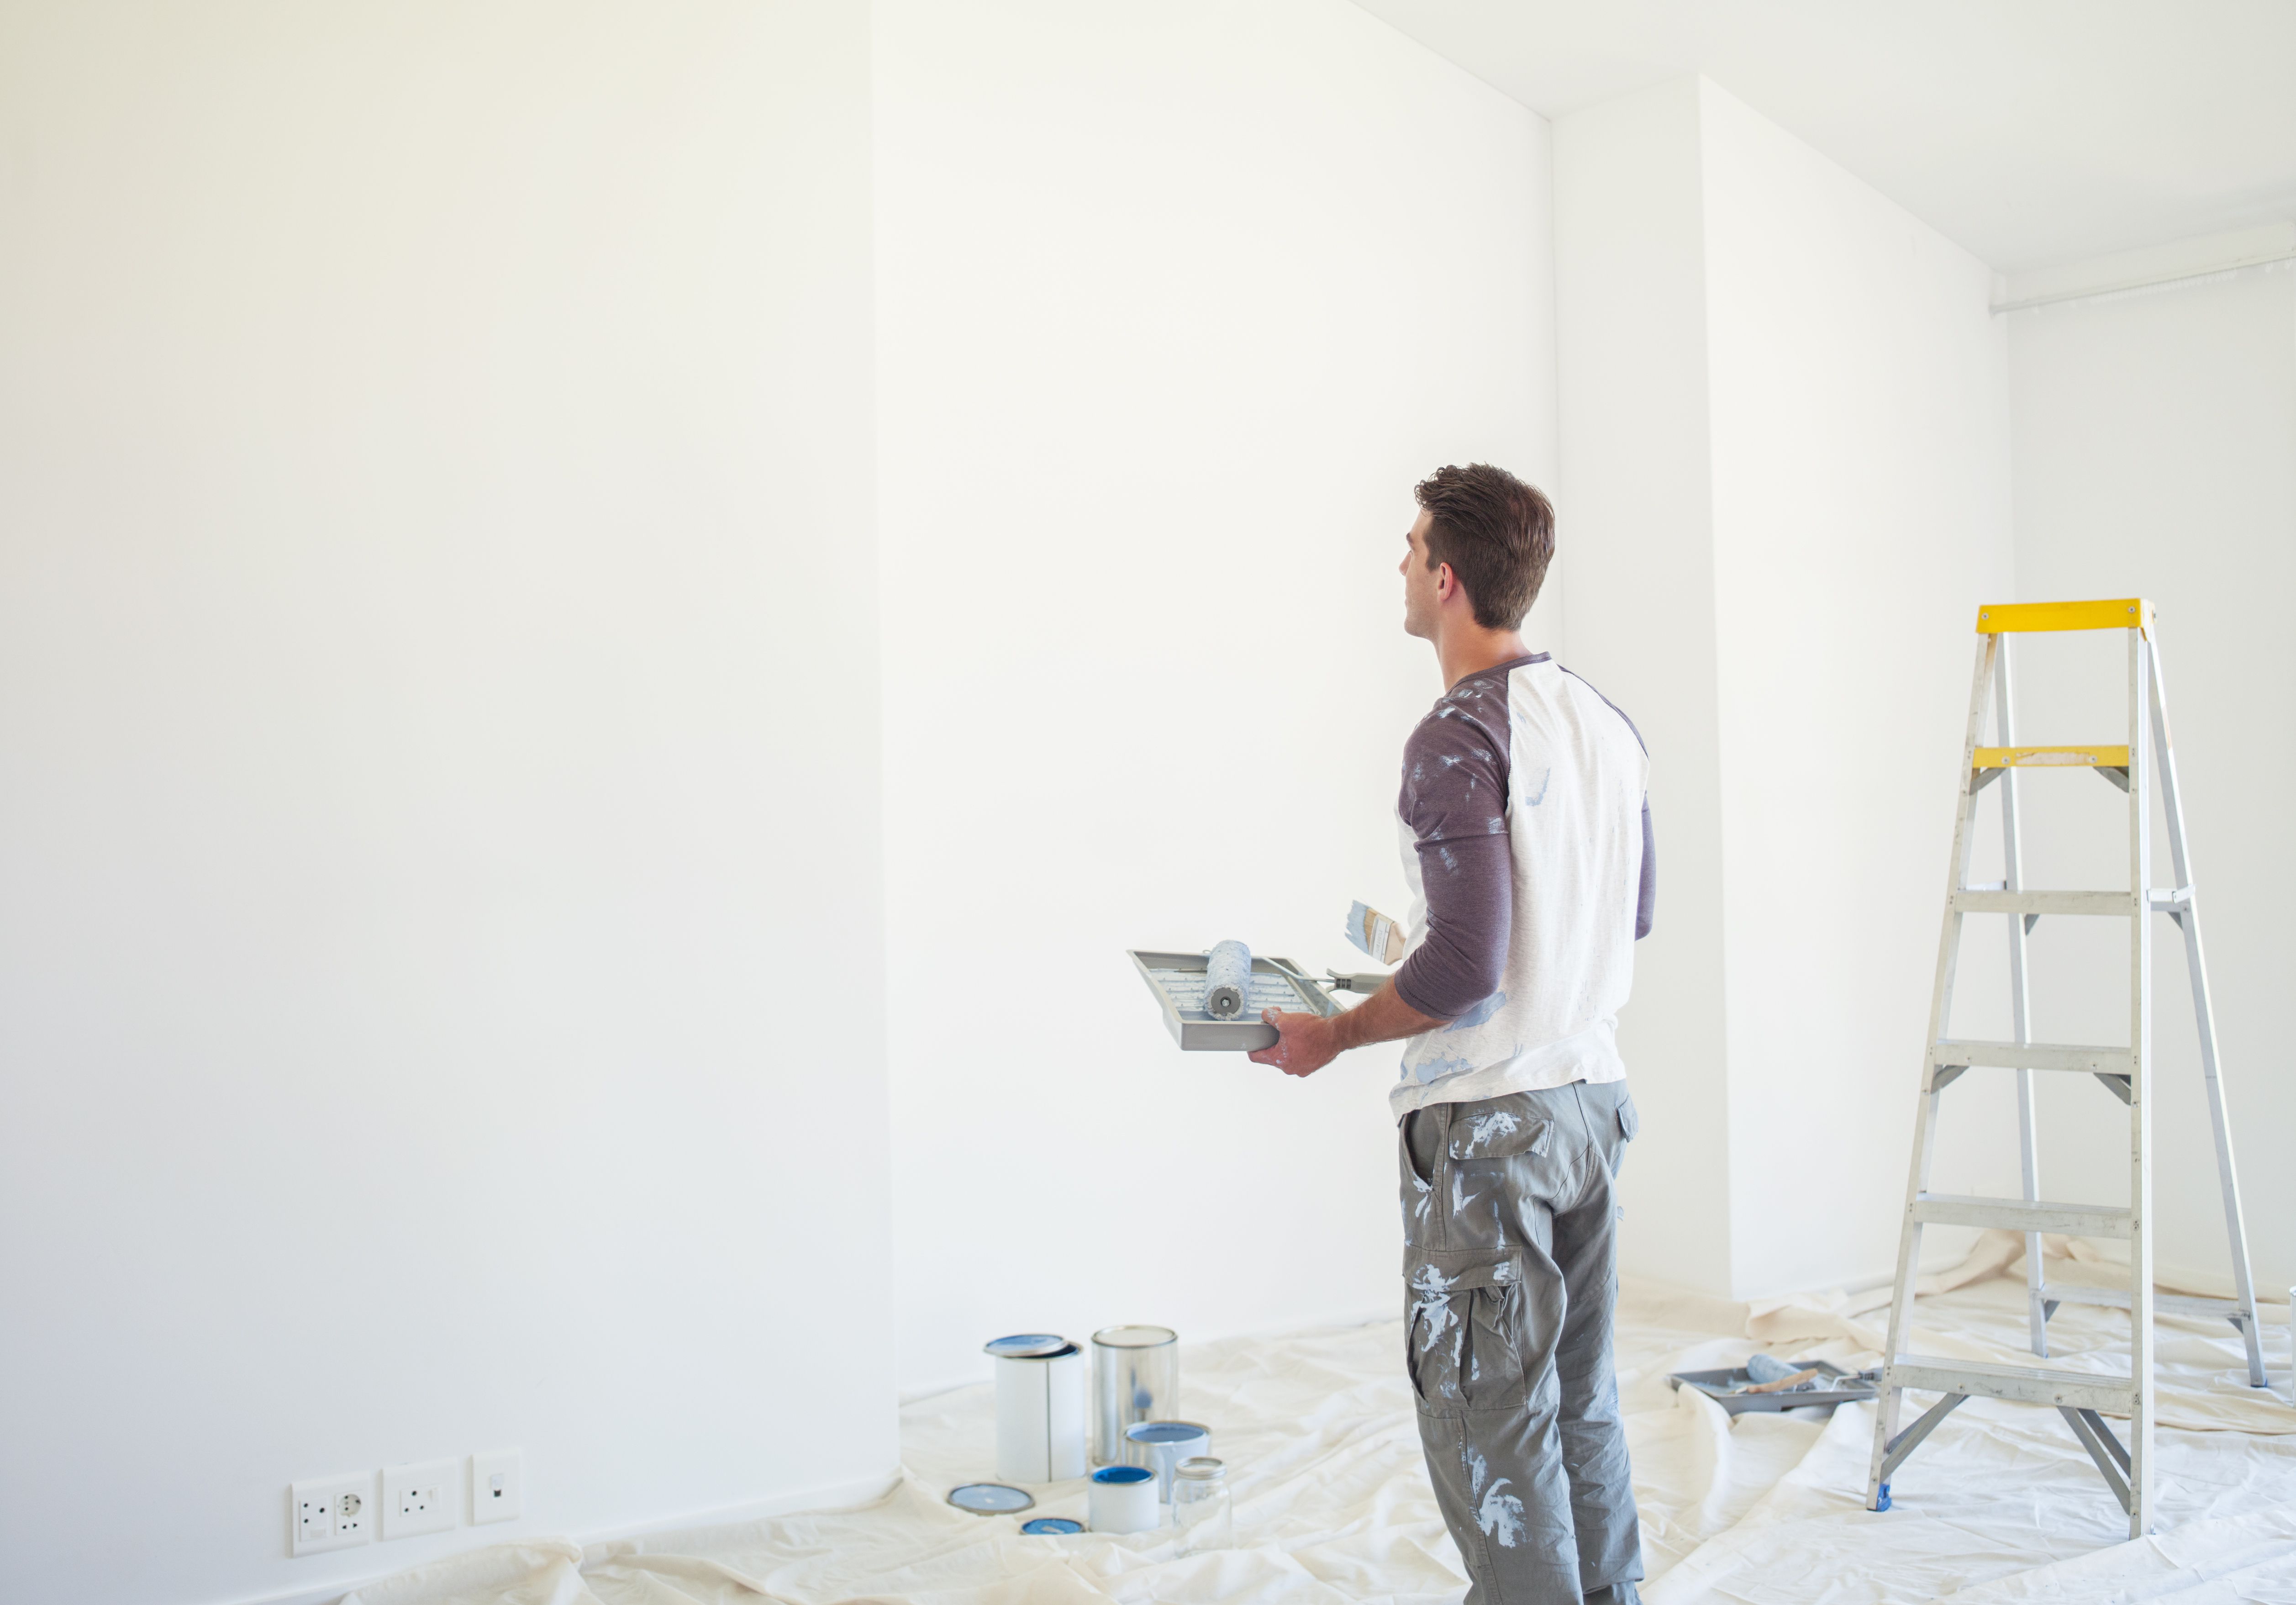 How to Paint Vinyl Mobile Home Walls Like a Pro